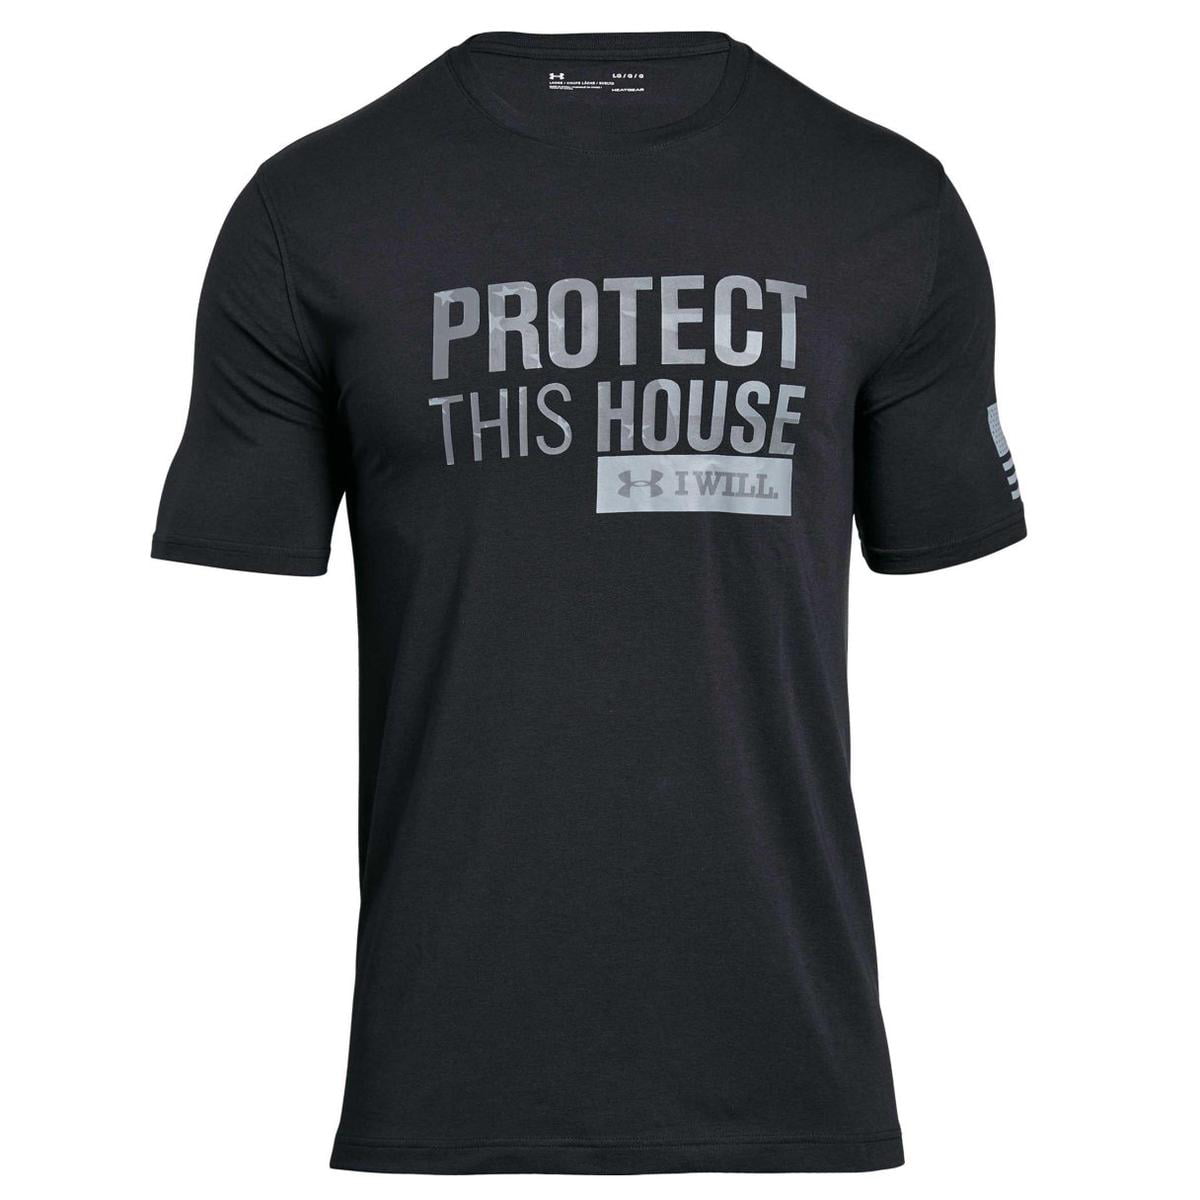 UNDER ARMOUR PROTECT THIS HOUSE MEN'S TEE 